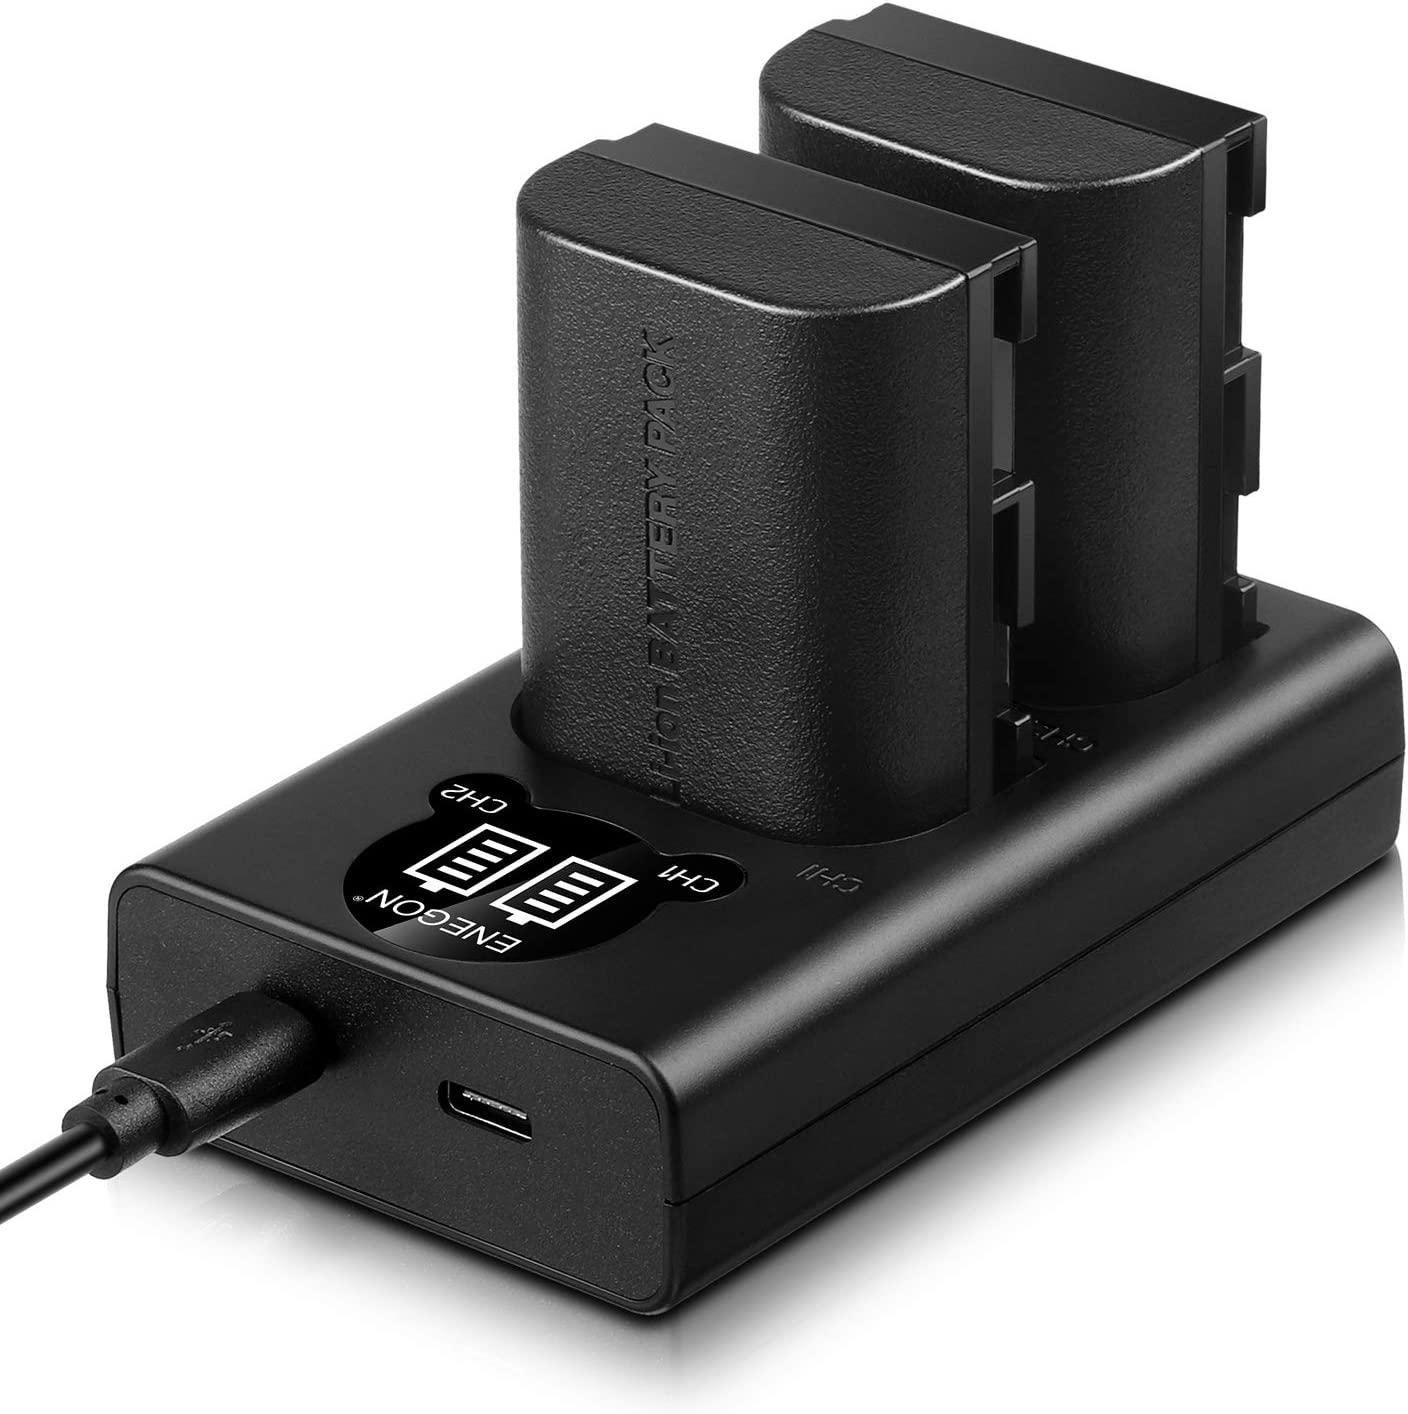 ENEGON, ENEGON LP-E6 Rechargeable Battery Pack (2pack) and Dual USB LED Charger, Compatible with Canon LP-E6, LP-E6N and Canon EOS 5D Mark II III IV, 5Ds, 5DS R, 6D, 7D, 7D Mark II, 60D, 70D, 80D